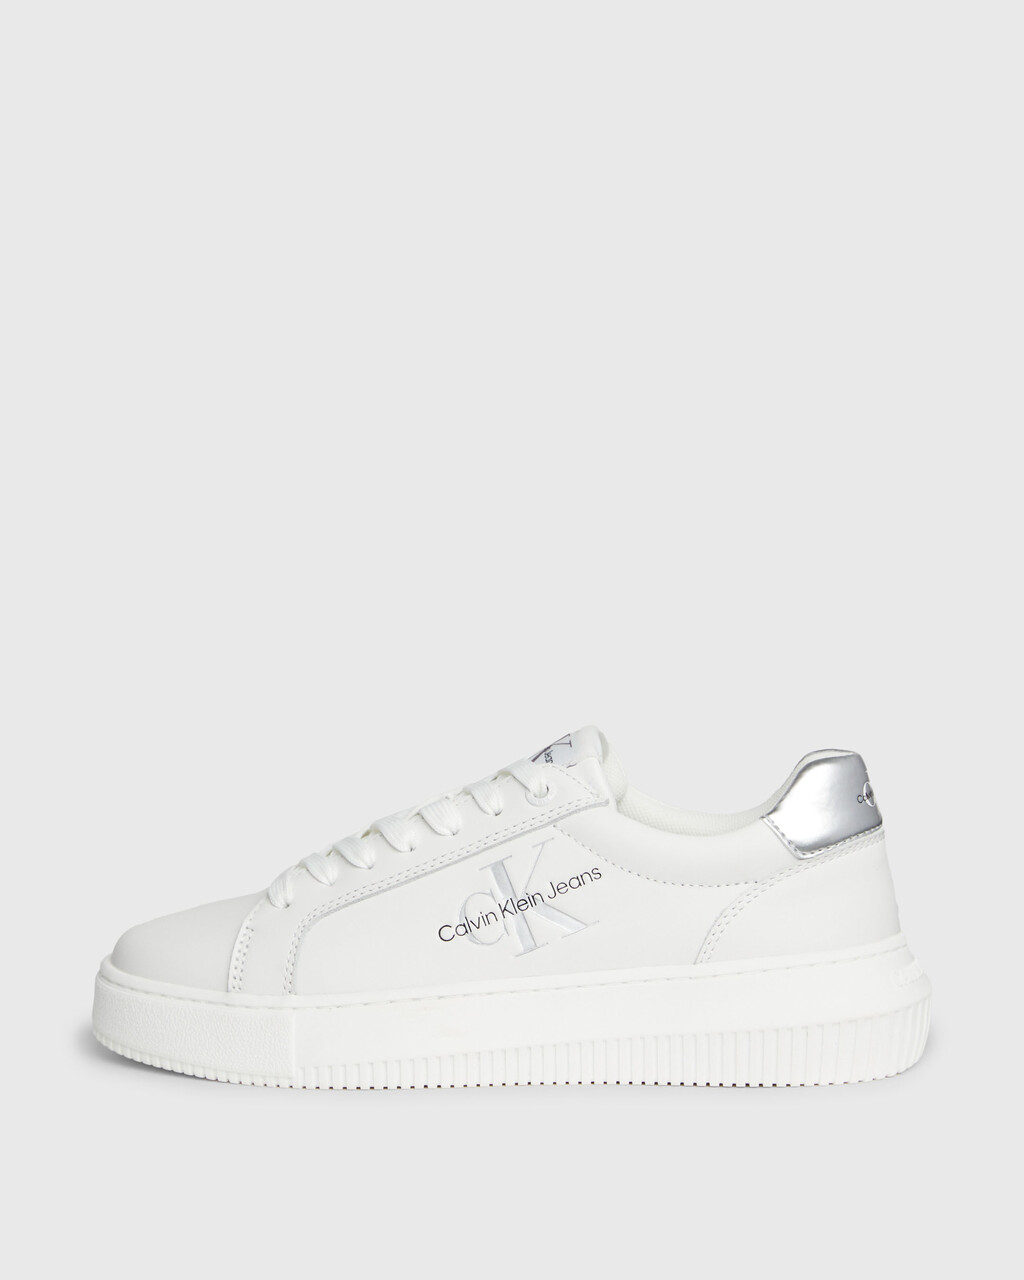 Leather Trainers, White/Silver, hi-res